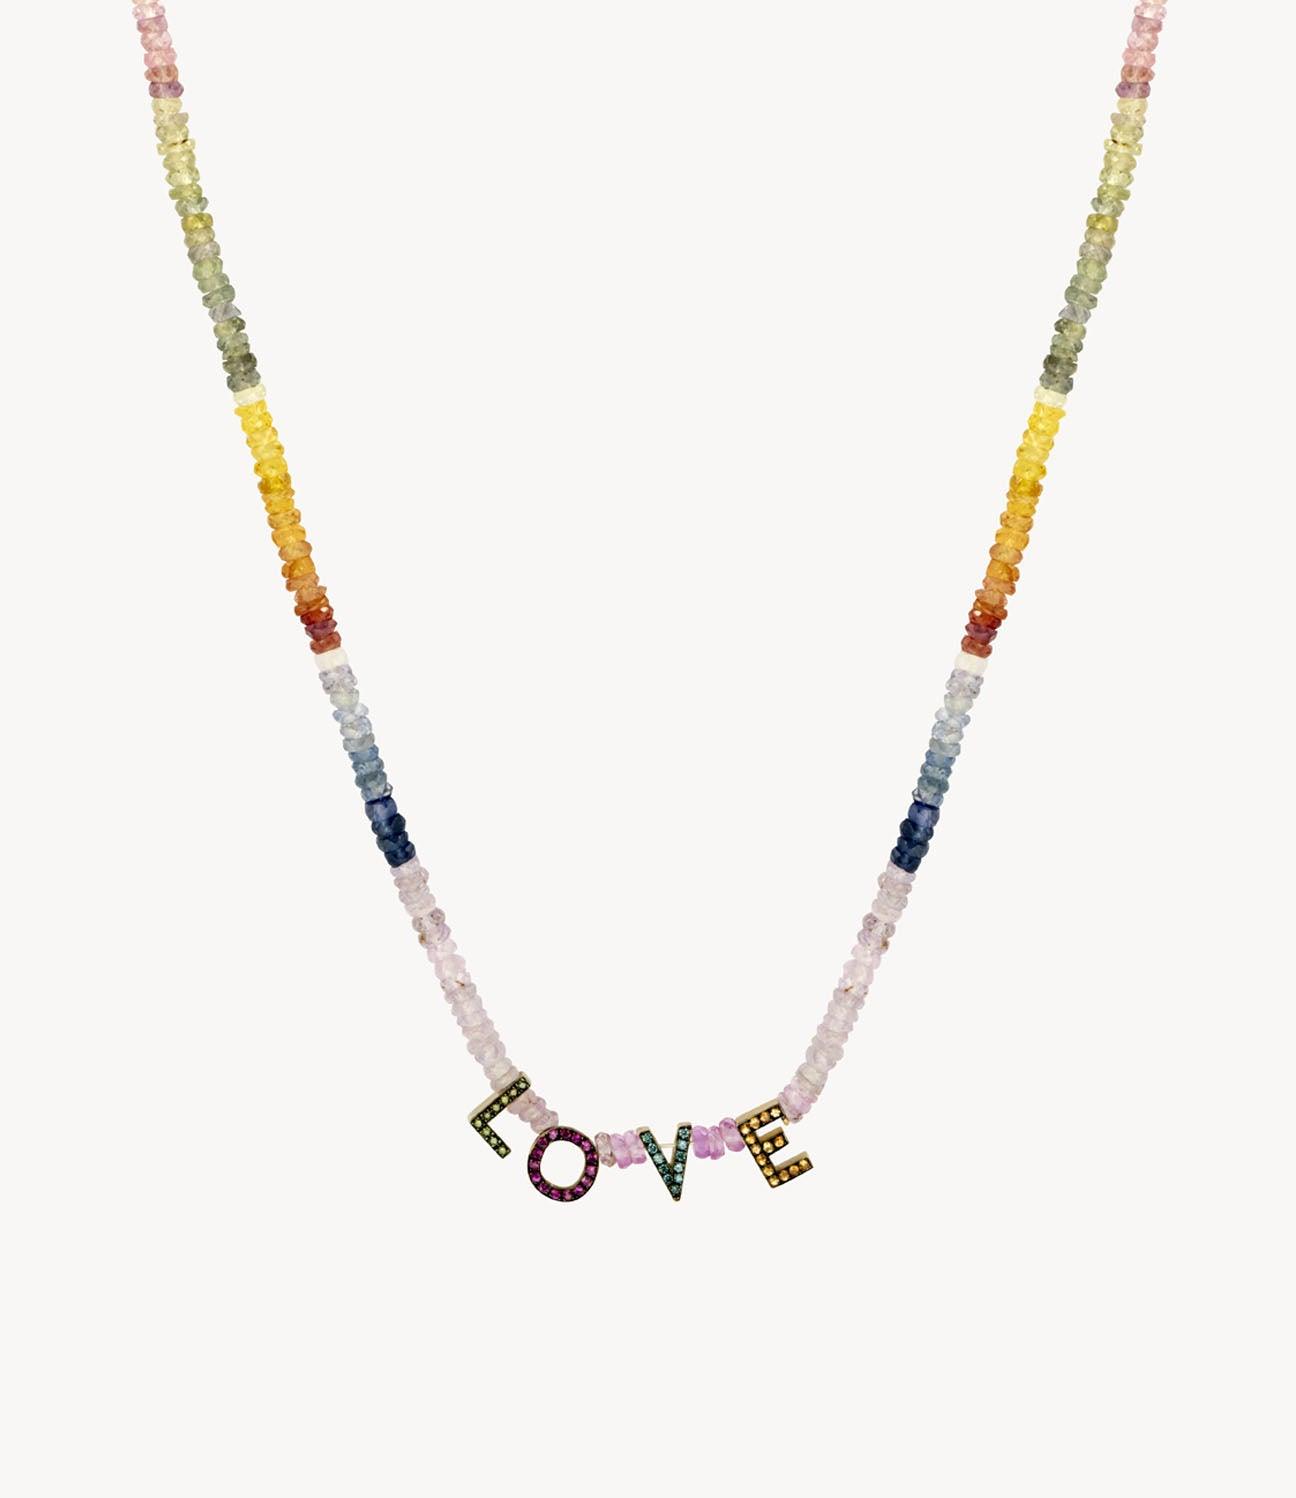 Sapphire 'Love' Necklace - Roxanne First